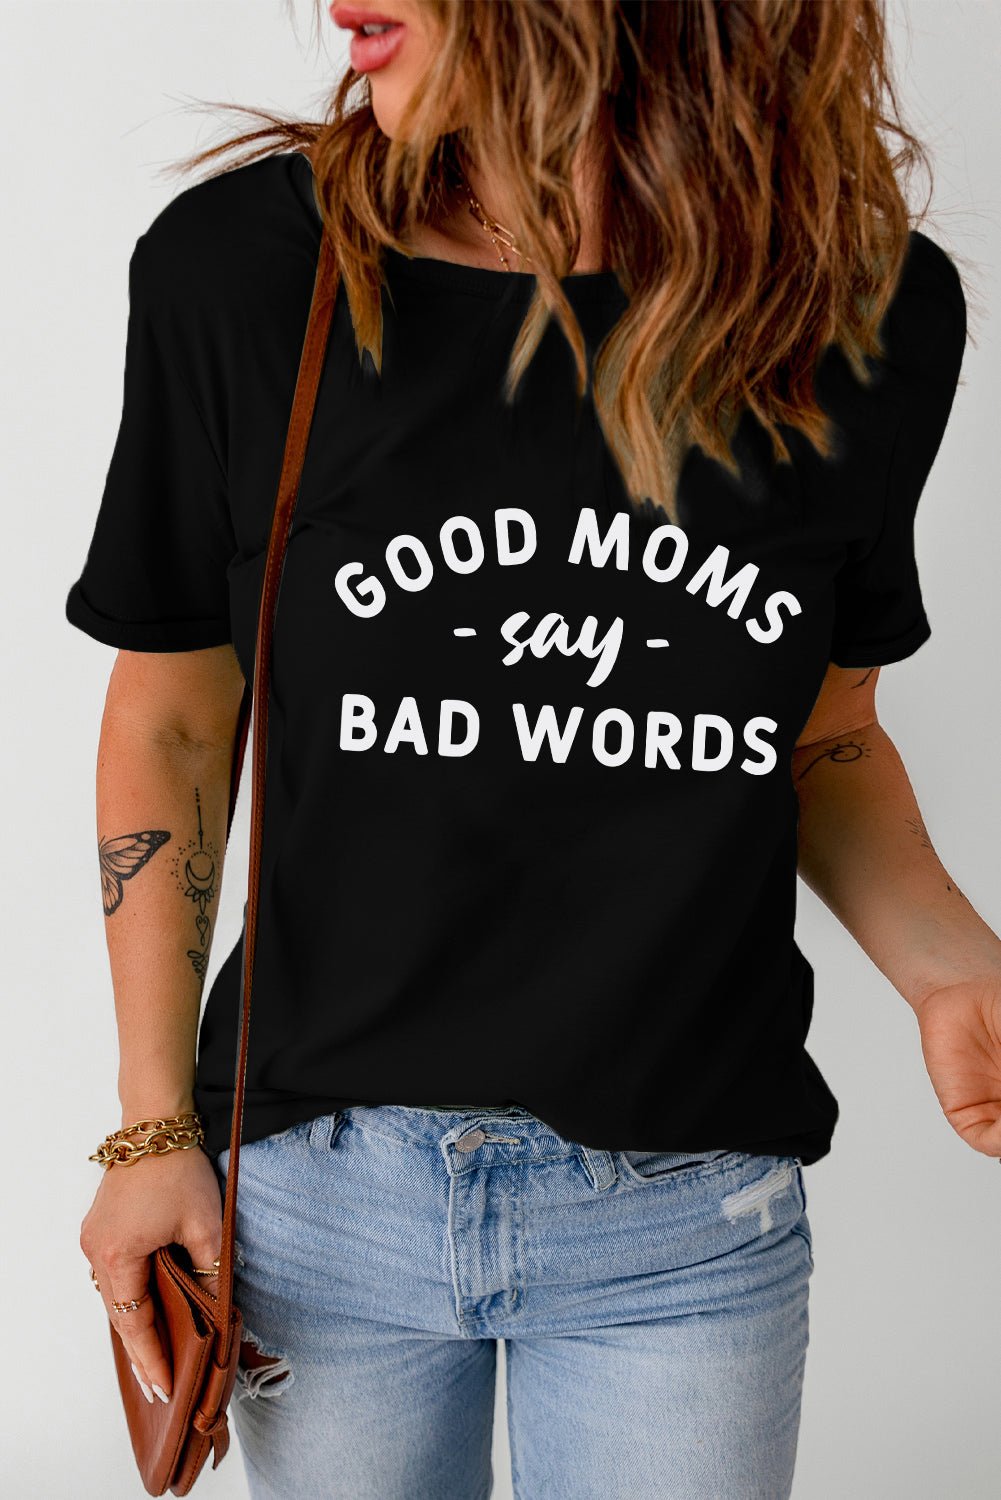 GOOD MOMS SAY BAD WORDS Graphic Tee - Fashion Girl Online Store